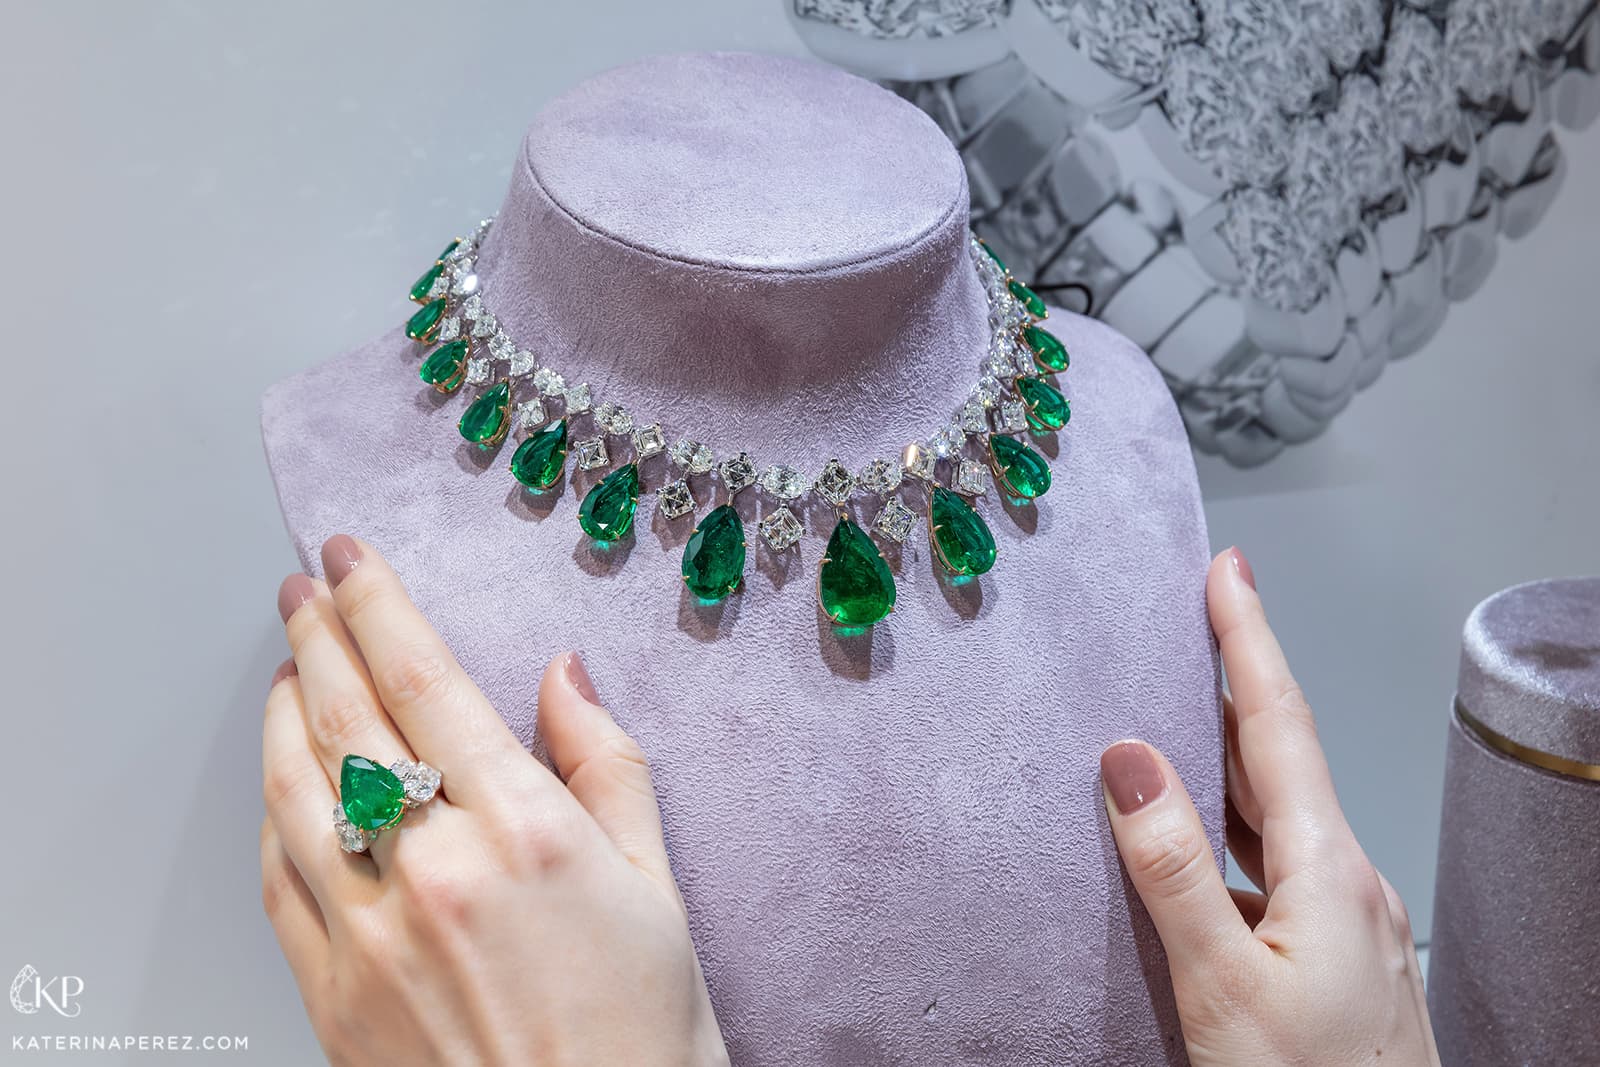 Objects of desire: Luvor high jewellery set with Colombian emeralds, all of which match in colour and clarity